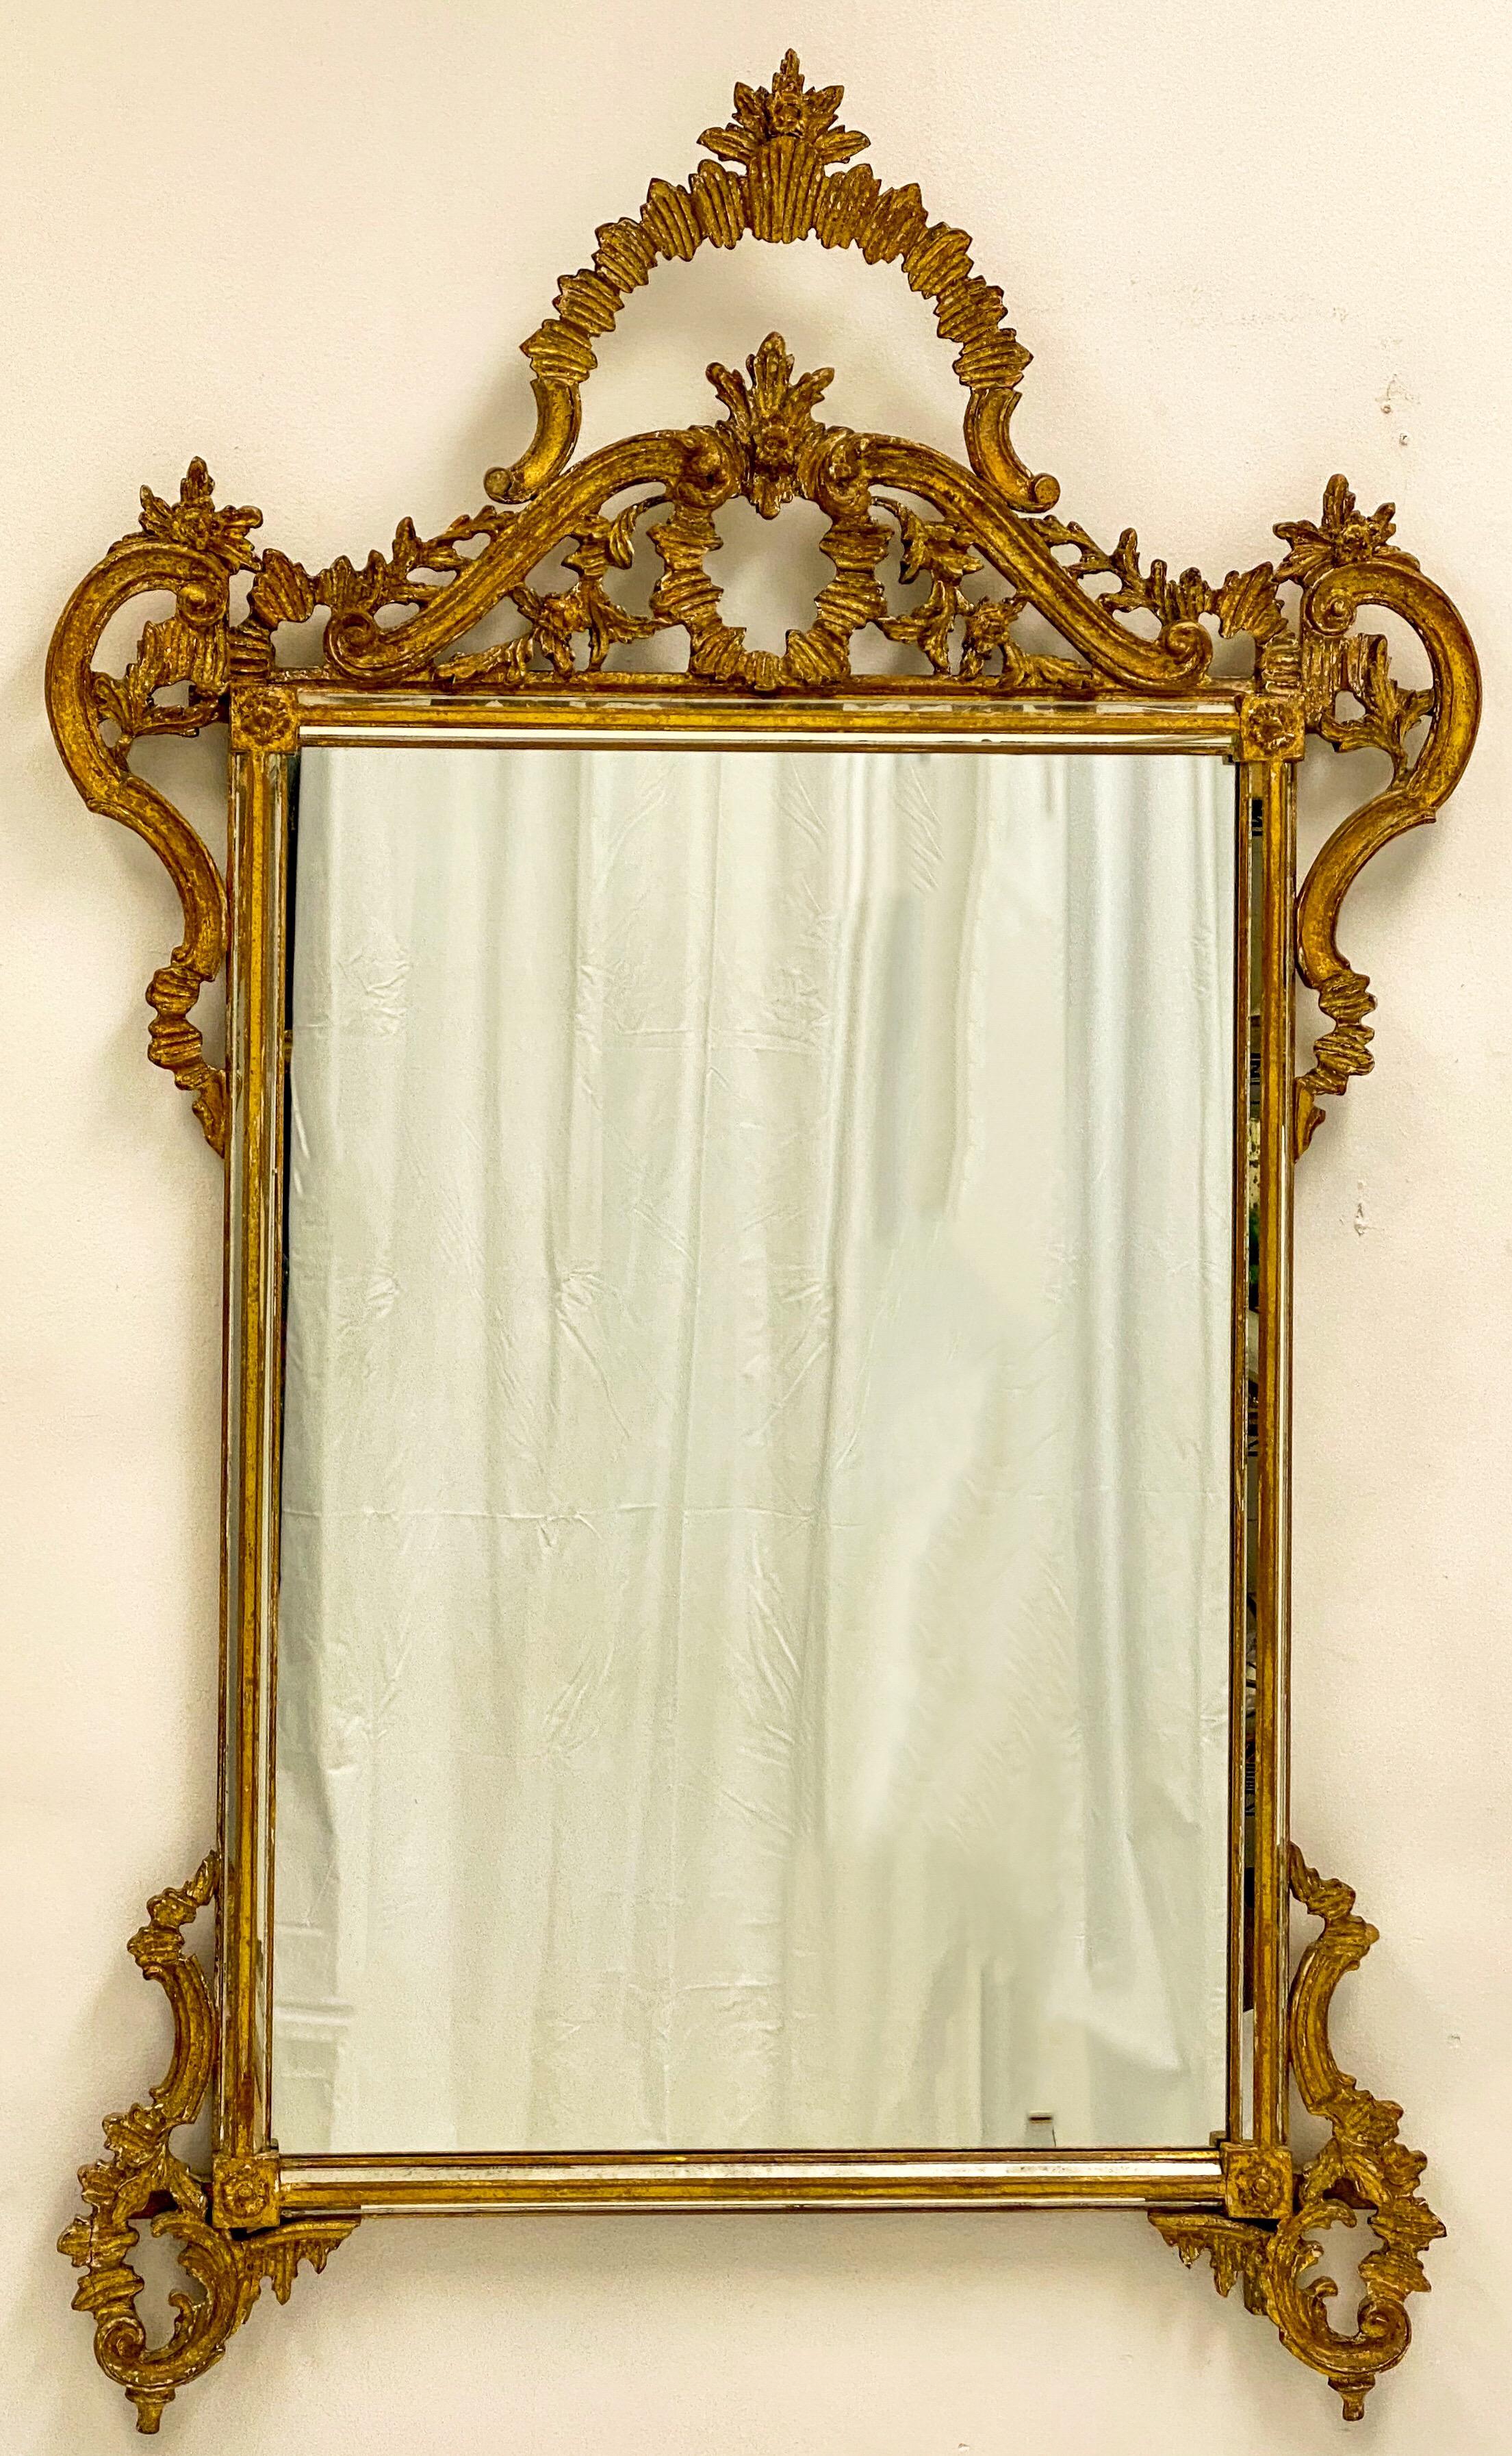 This is an Italian carved giltwood Rococo style mirror by Labarge. It is marked and shows some lite age wear to the ornate frame.